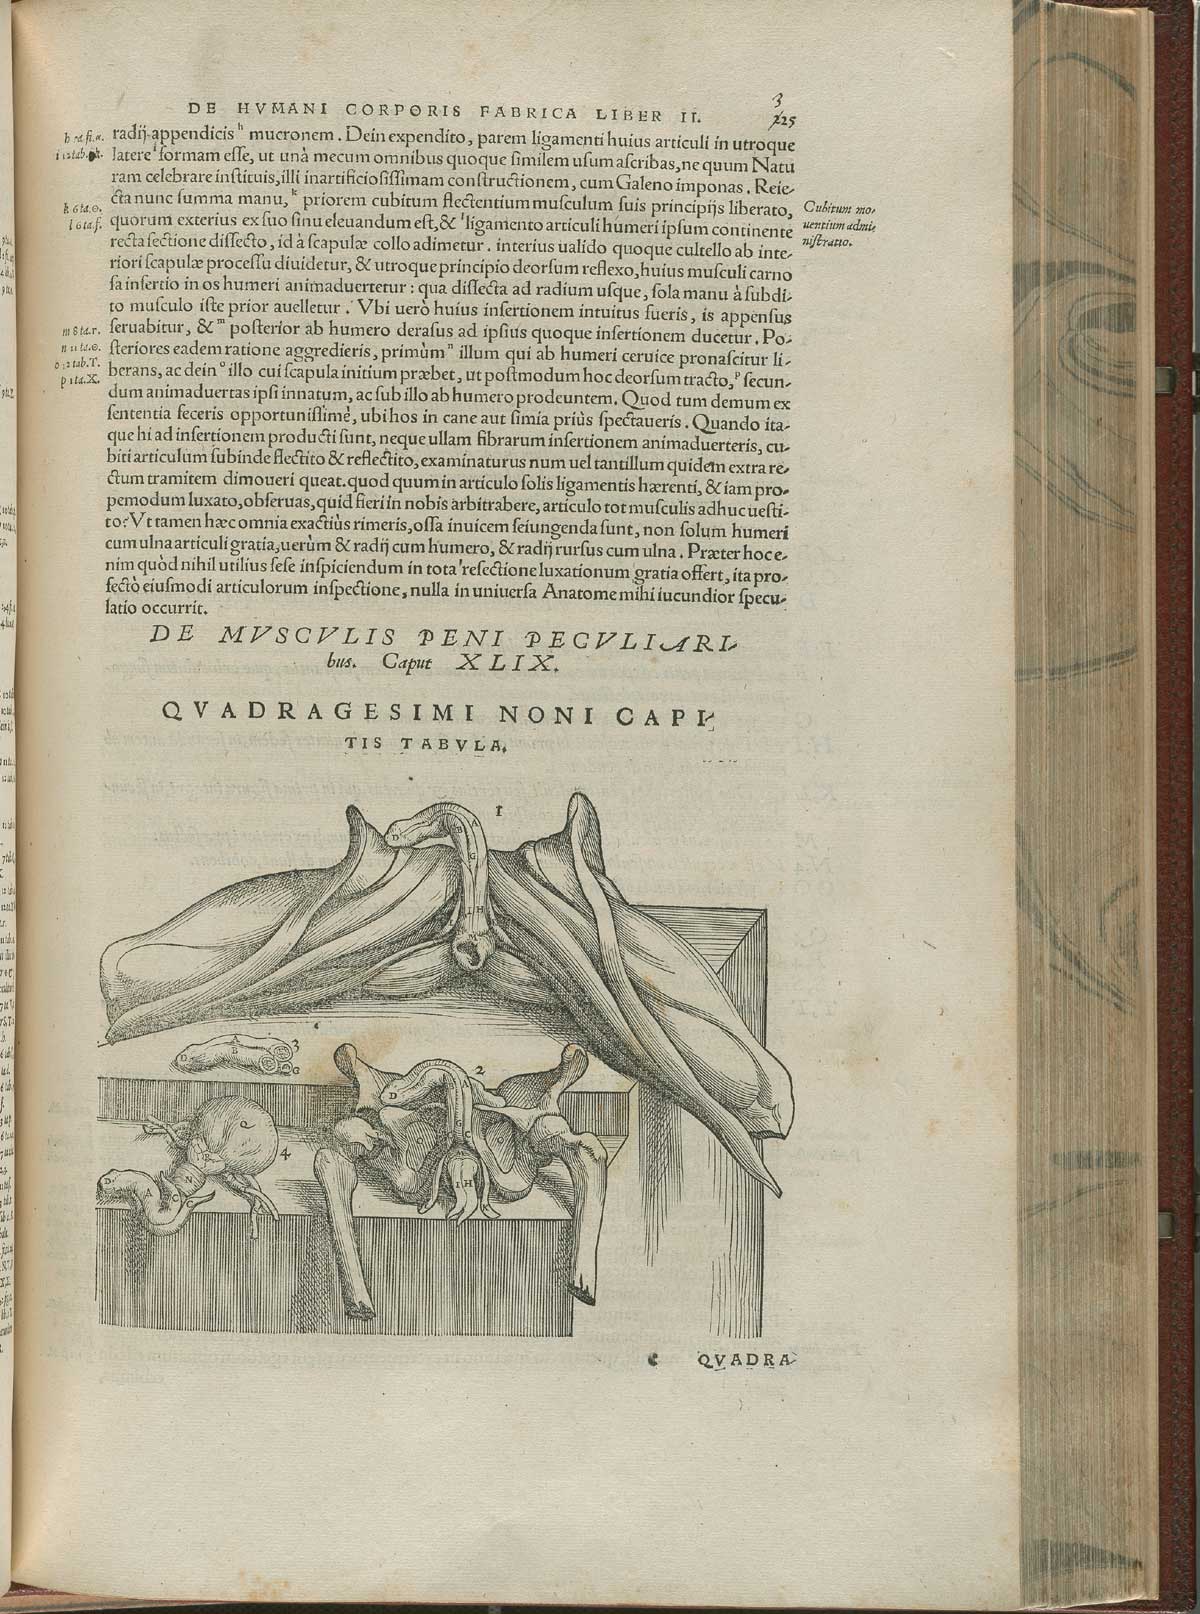 Page 325 of Andreas Vesalius' De corporis humani fabrica libri septem, featuring the illustrated woodcut of the muscles of the male pelvis and genital urinary structures.